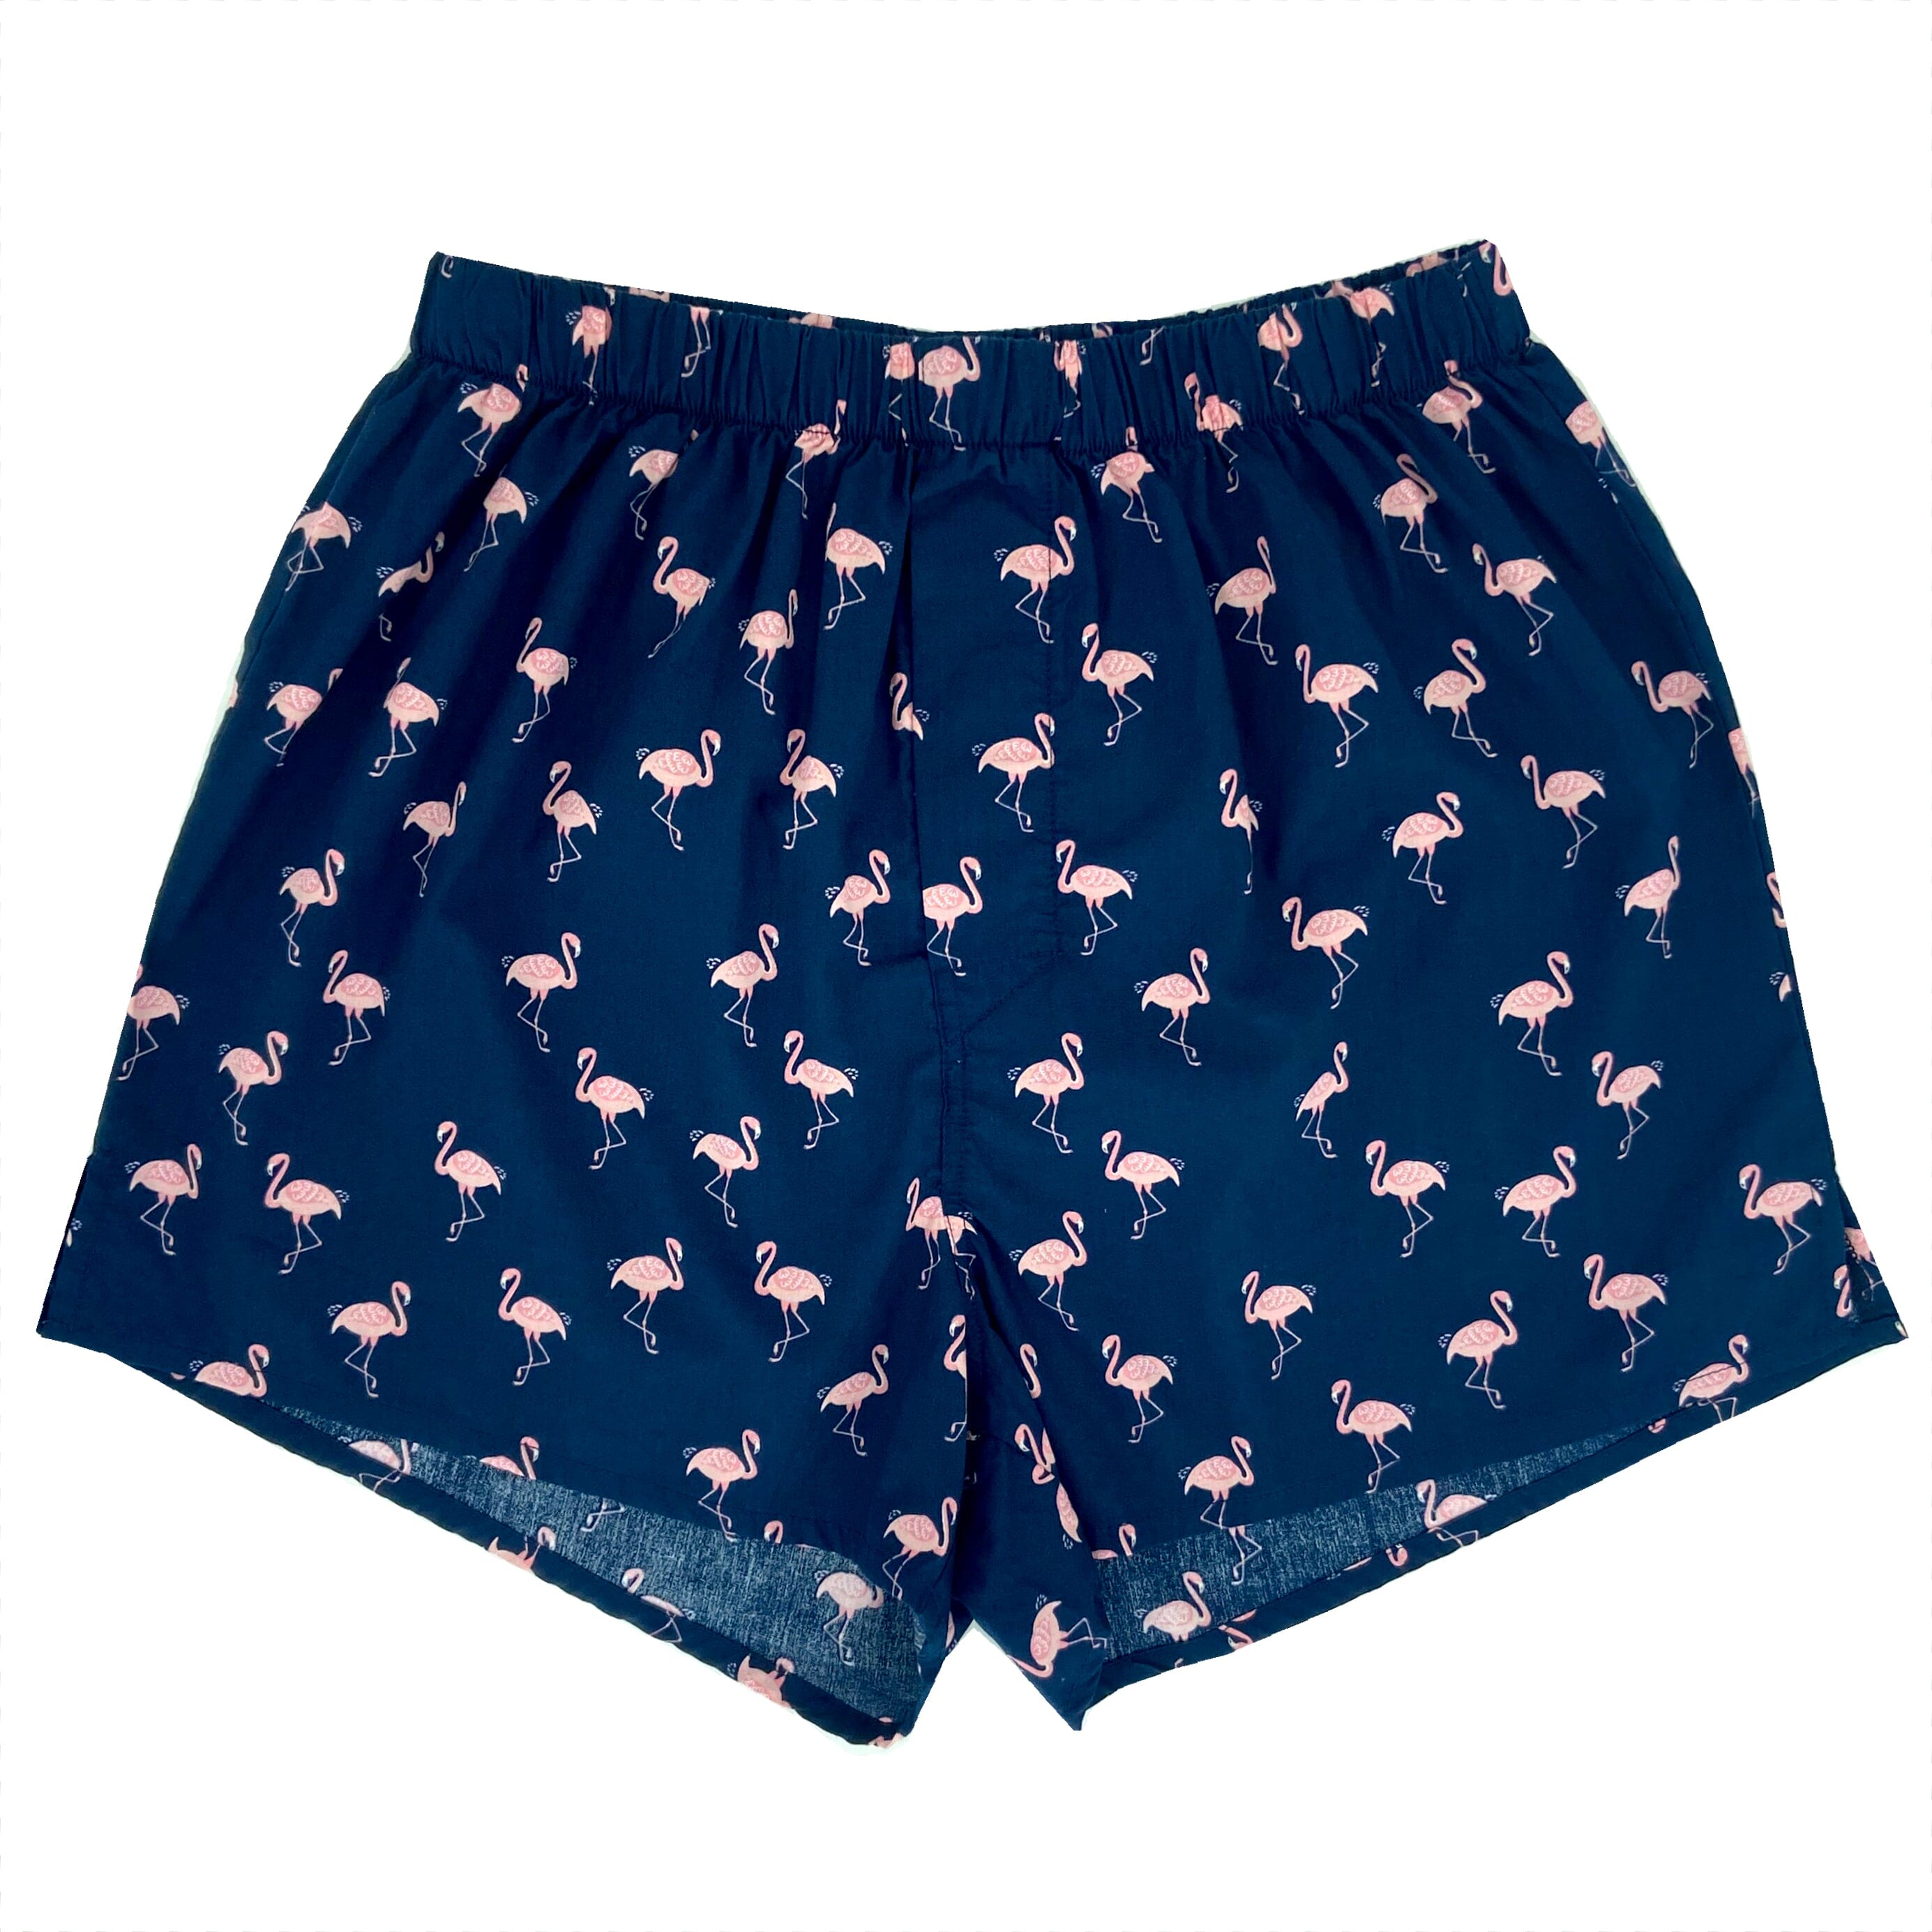 Men's Flamingo All Over Novelty Print Boxer Shorts Underwear in Blue